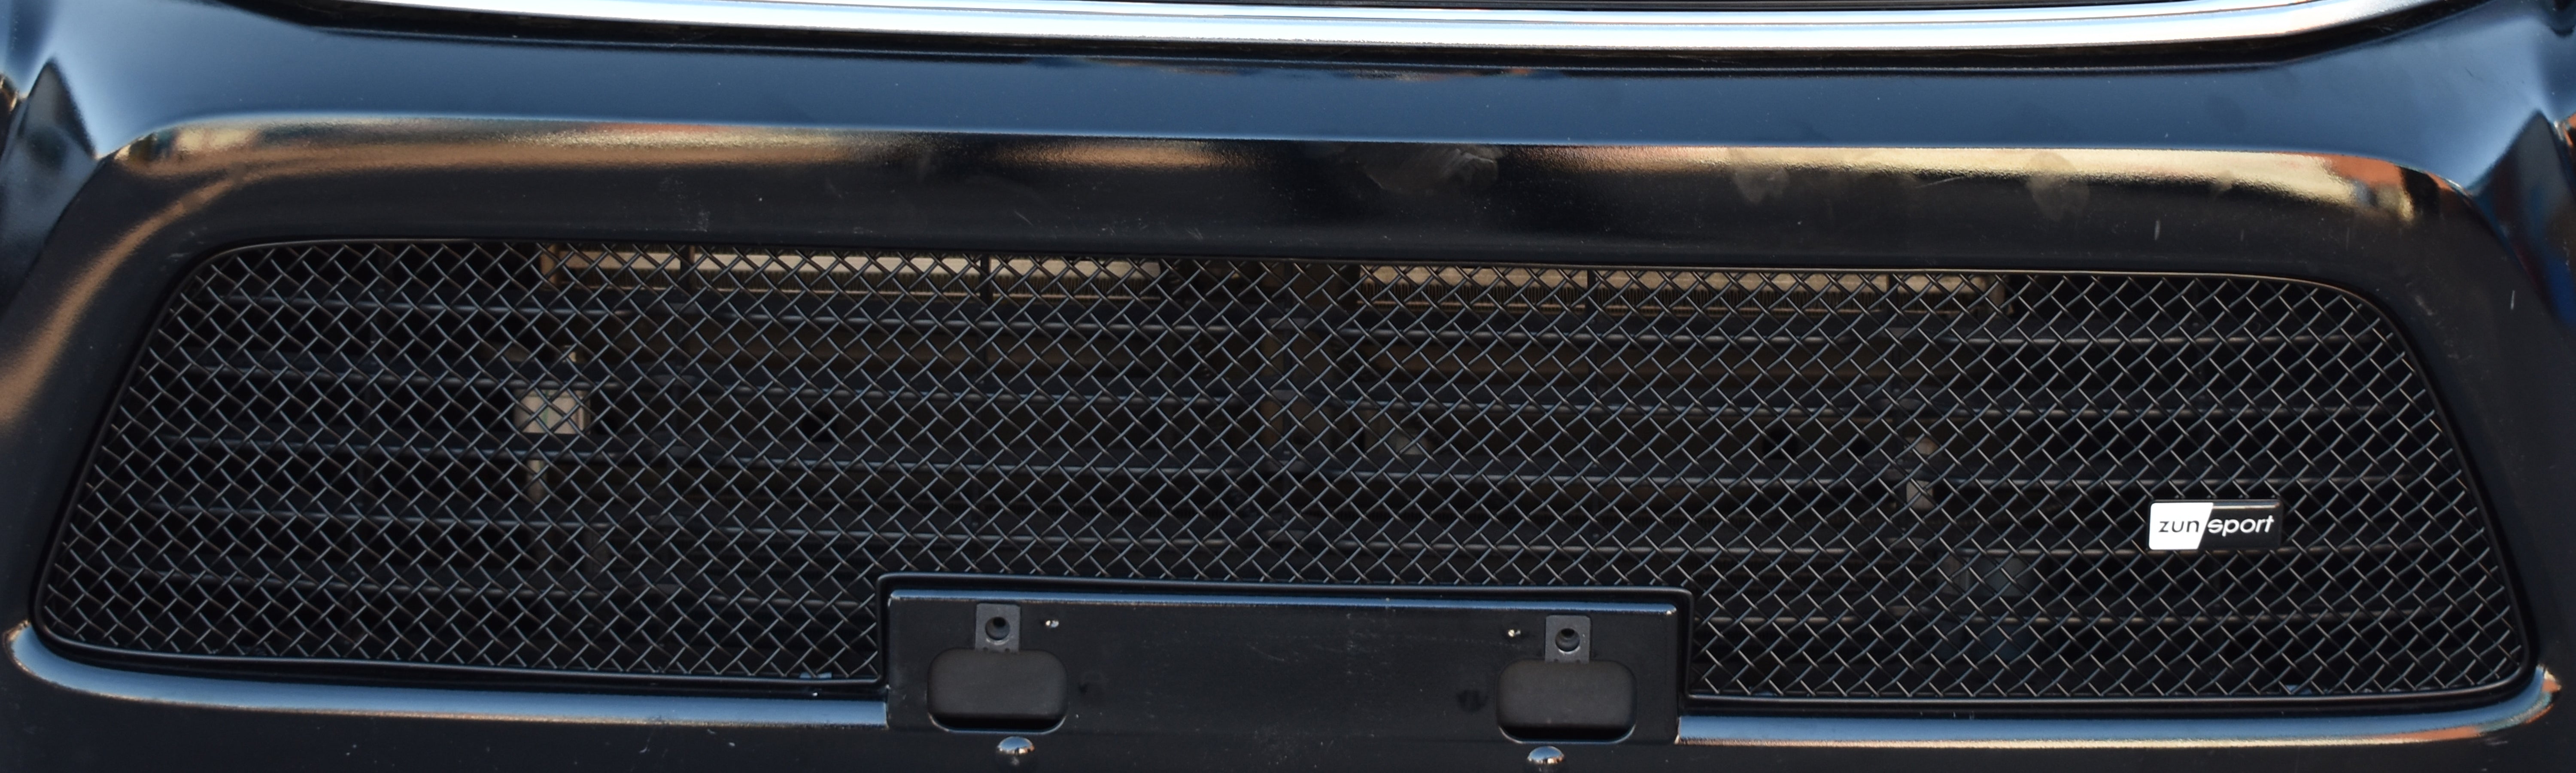 Zunsport Toyota Hilux AN120 / AN130 2015 - Lower Grille Black